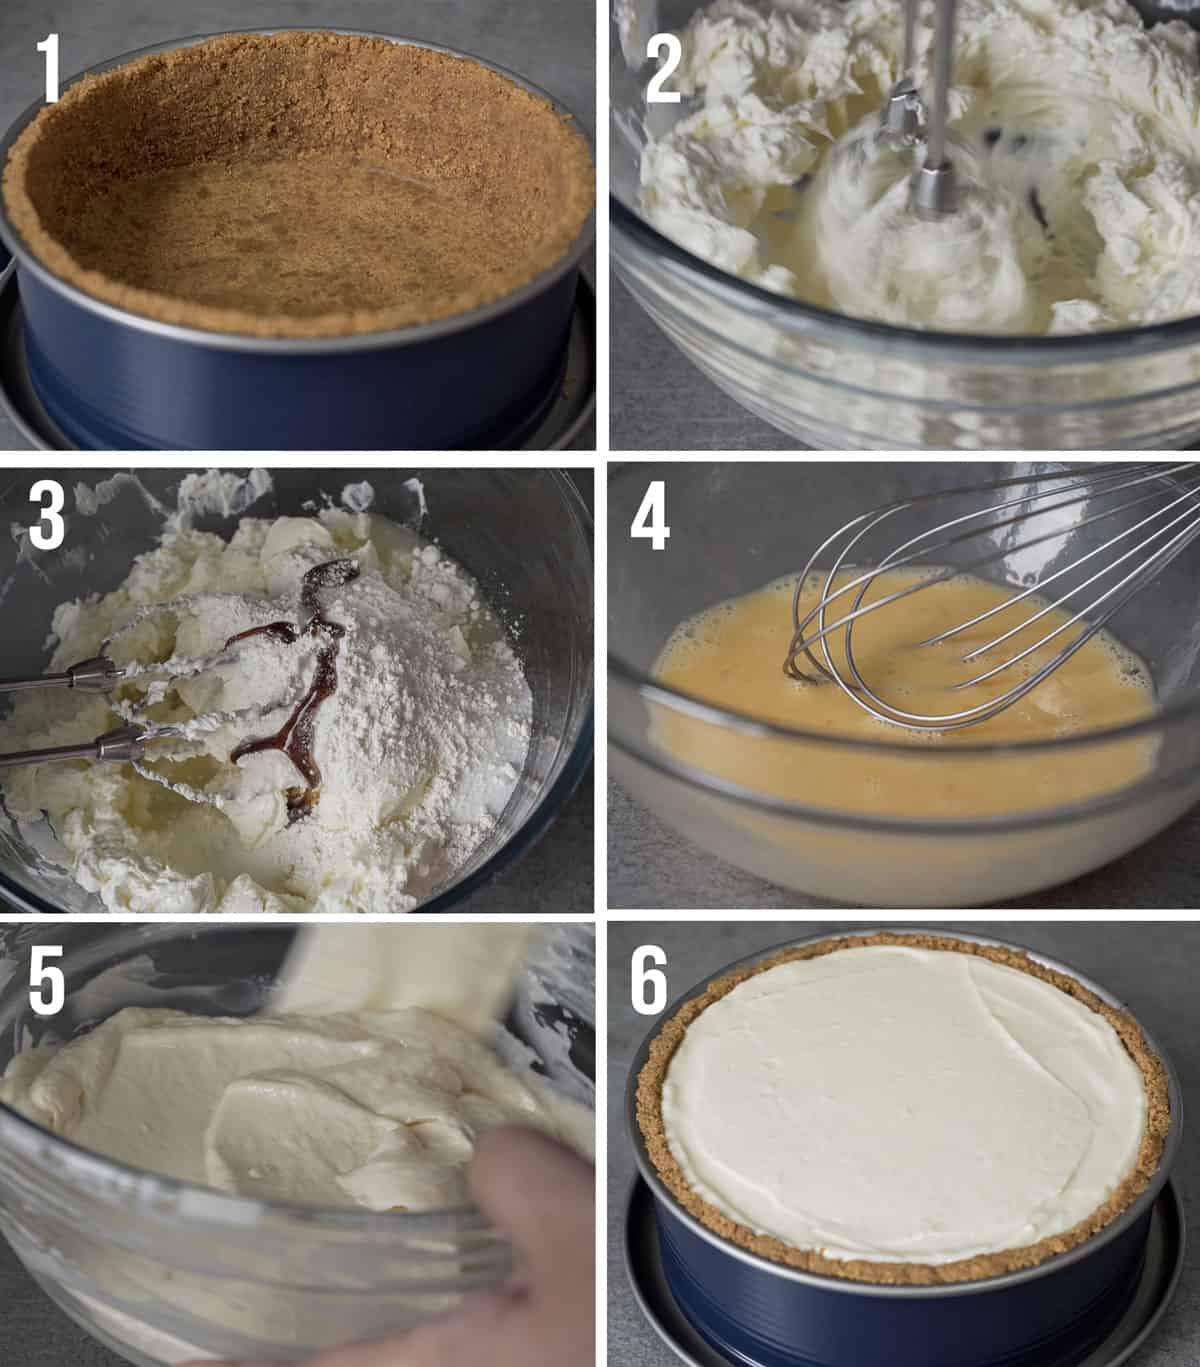 Steps on how to make easy cheesecake.